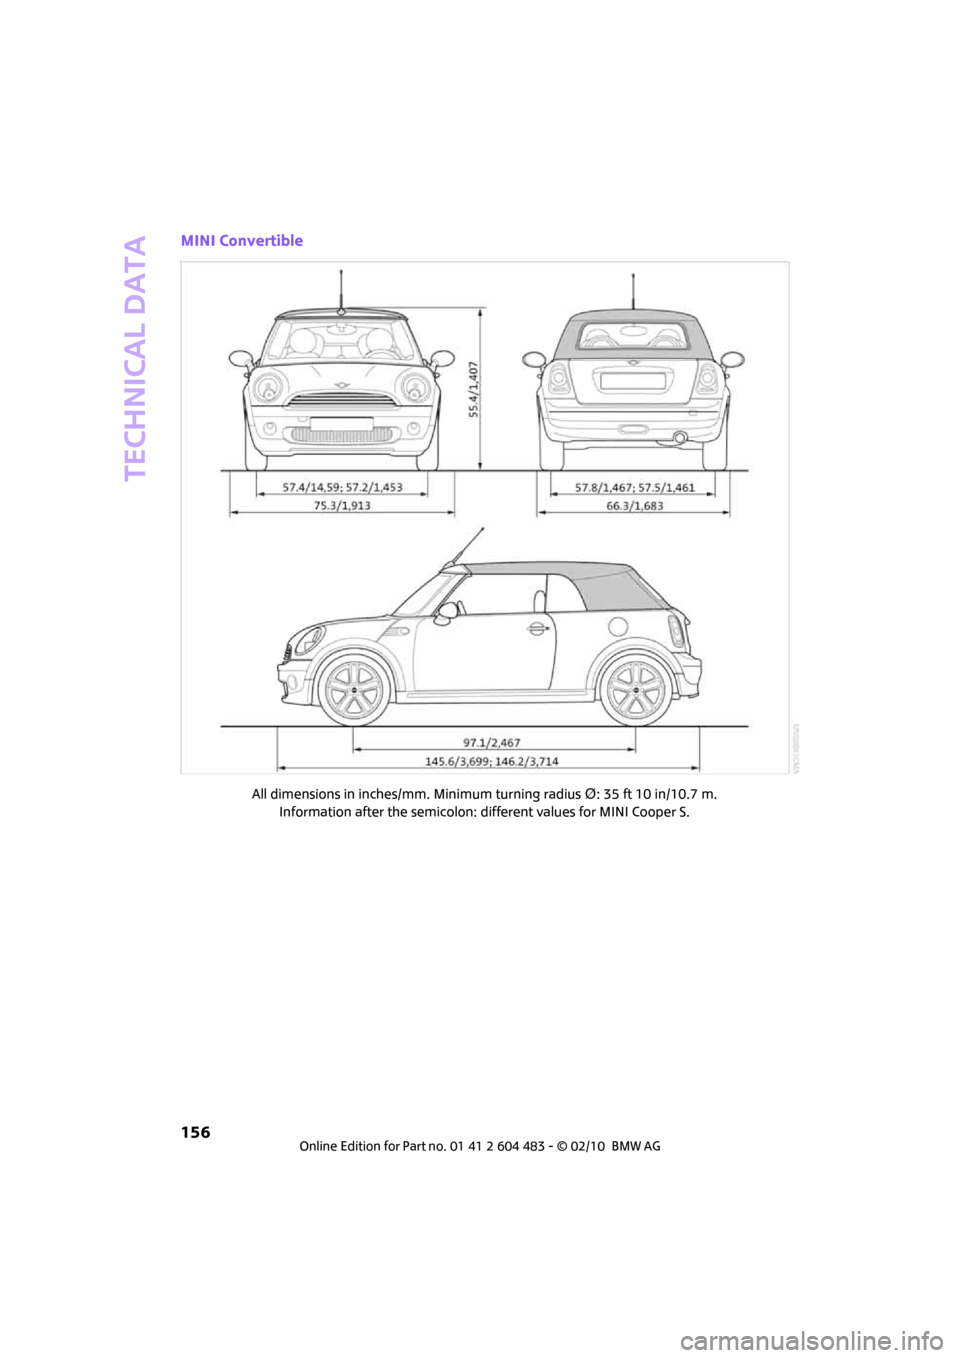 MINI Hardtop 2 Door 2010  Owners Manual Technical data
156
MINI Convertible
All dimensions in inches/mm. Minimum turning radius Δ: 35 ft 10 in/10.7 m. 
Information after the semicolon: different values for MINI Cooper S. 